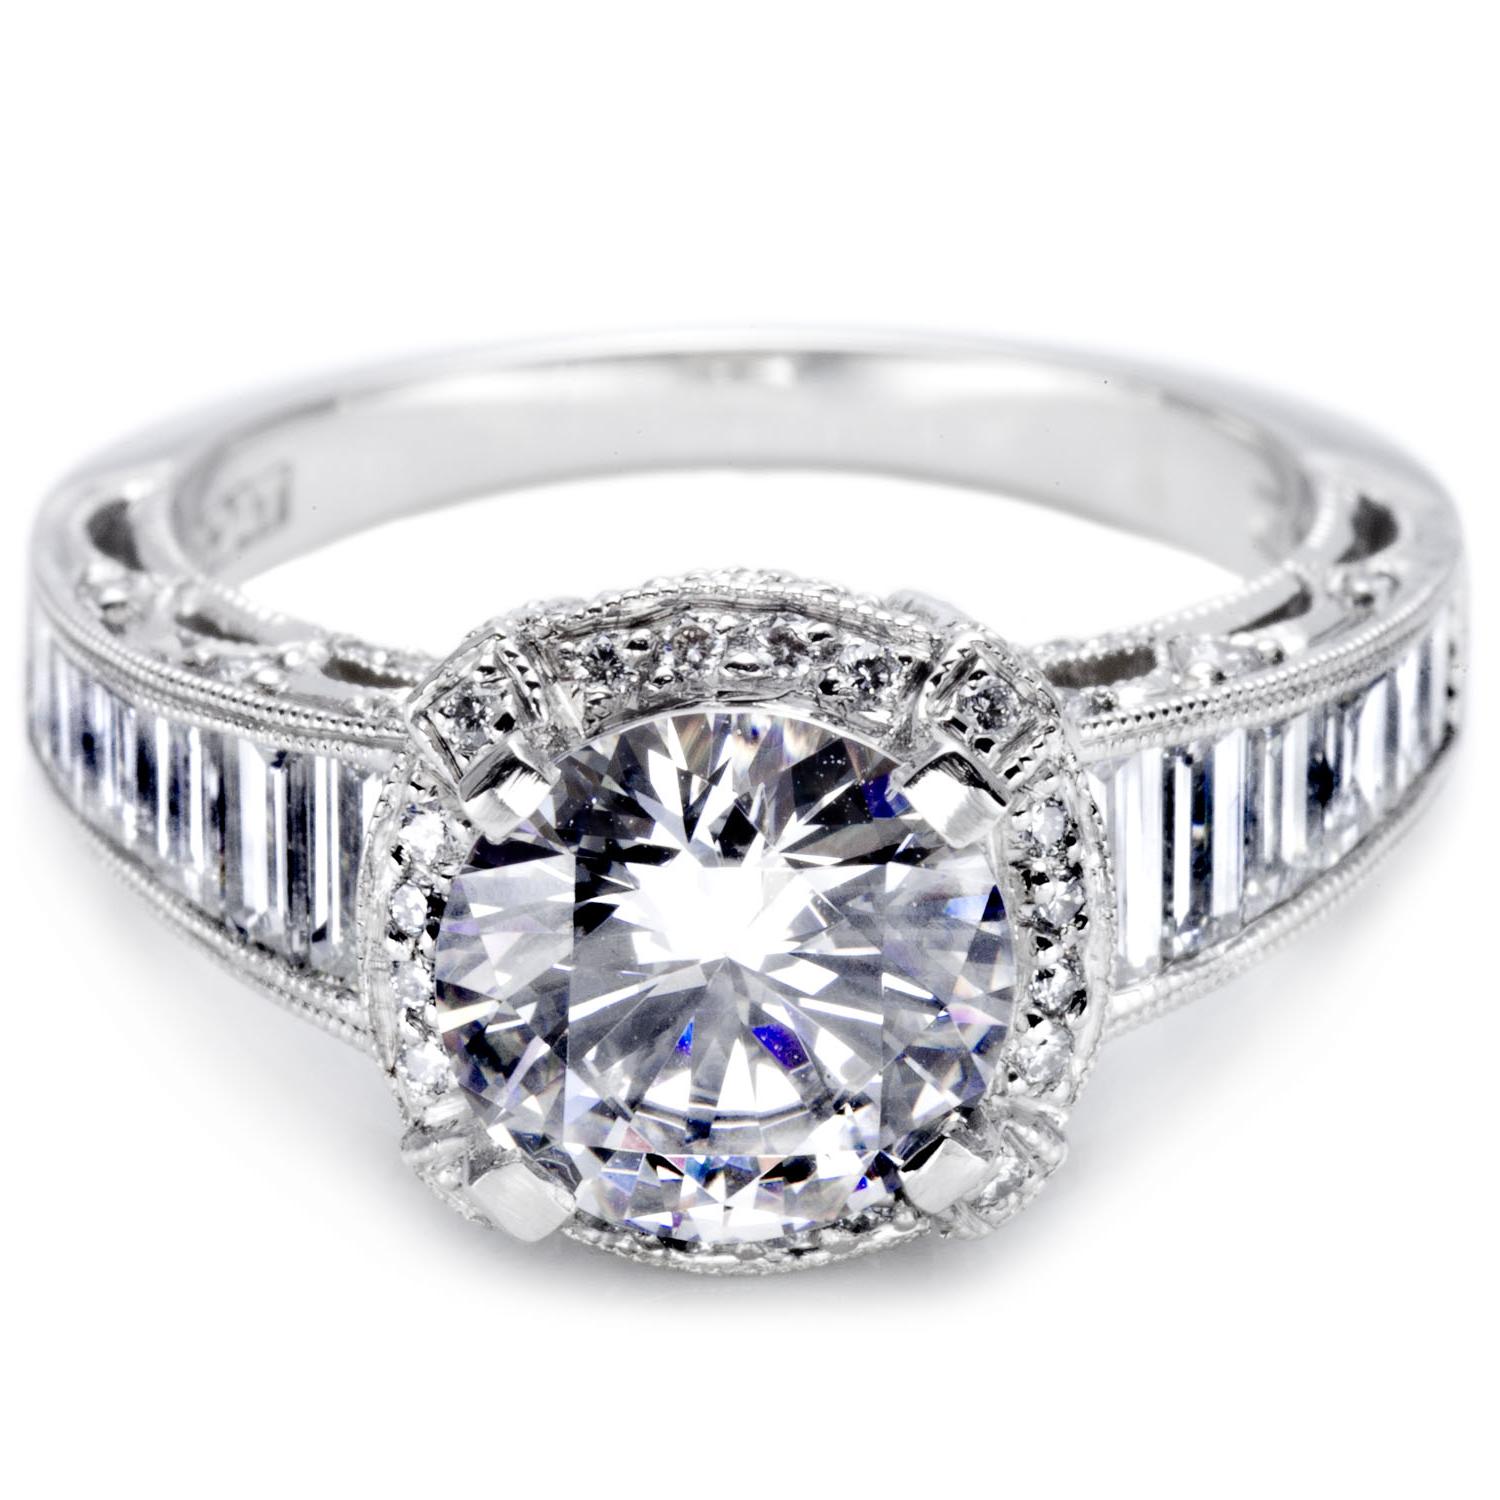 This Tacori engagement ring is